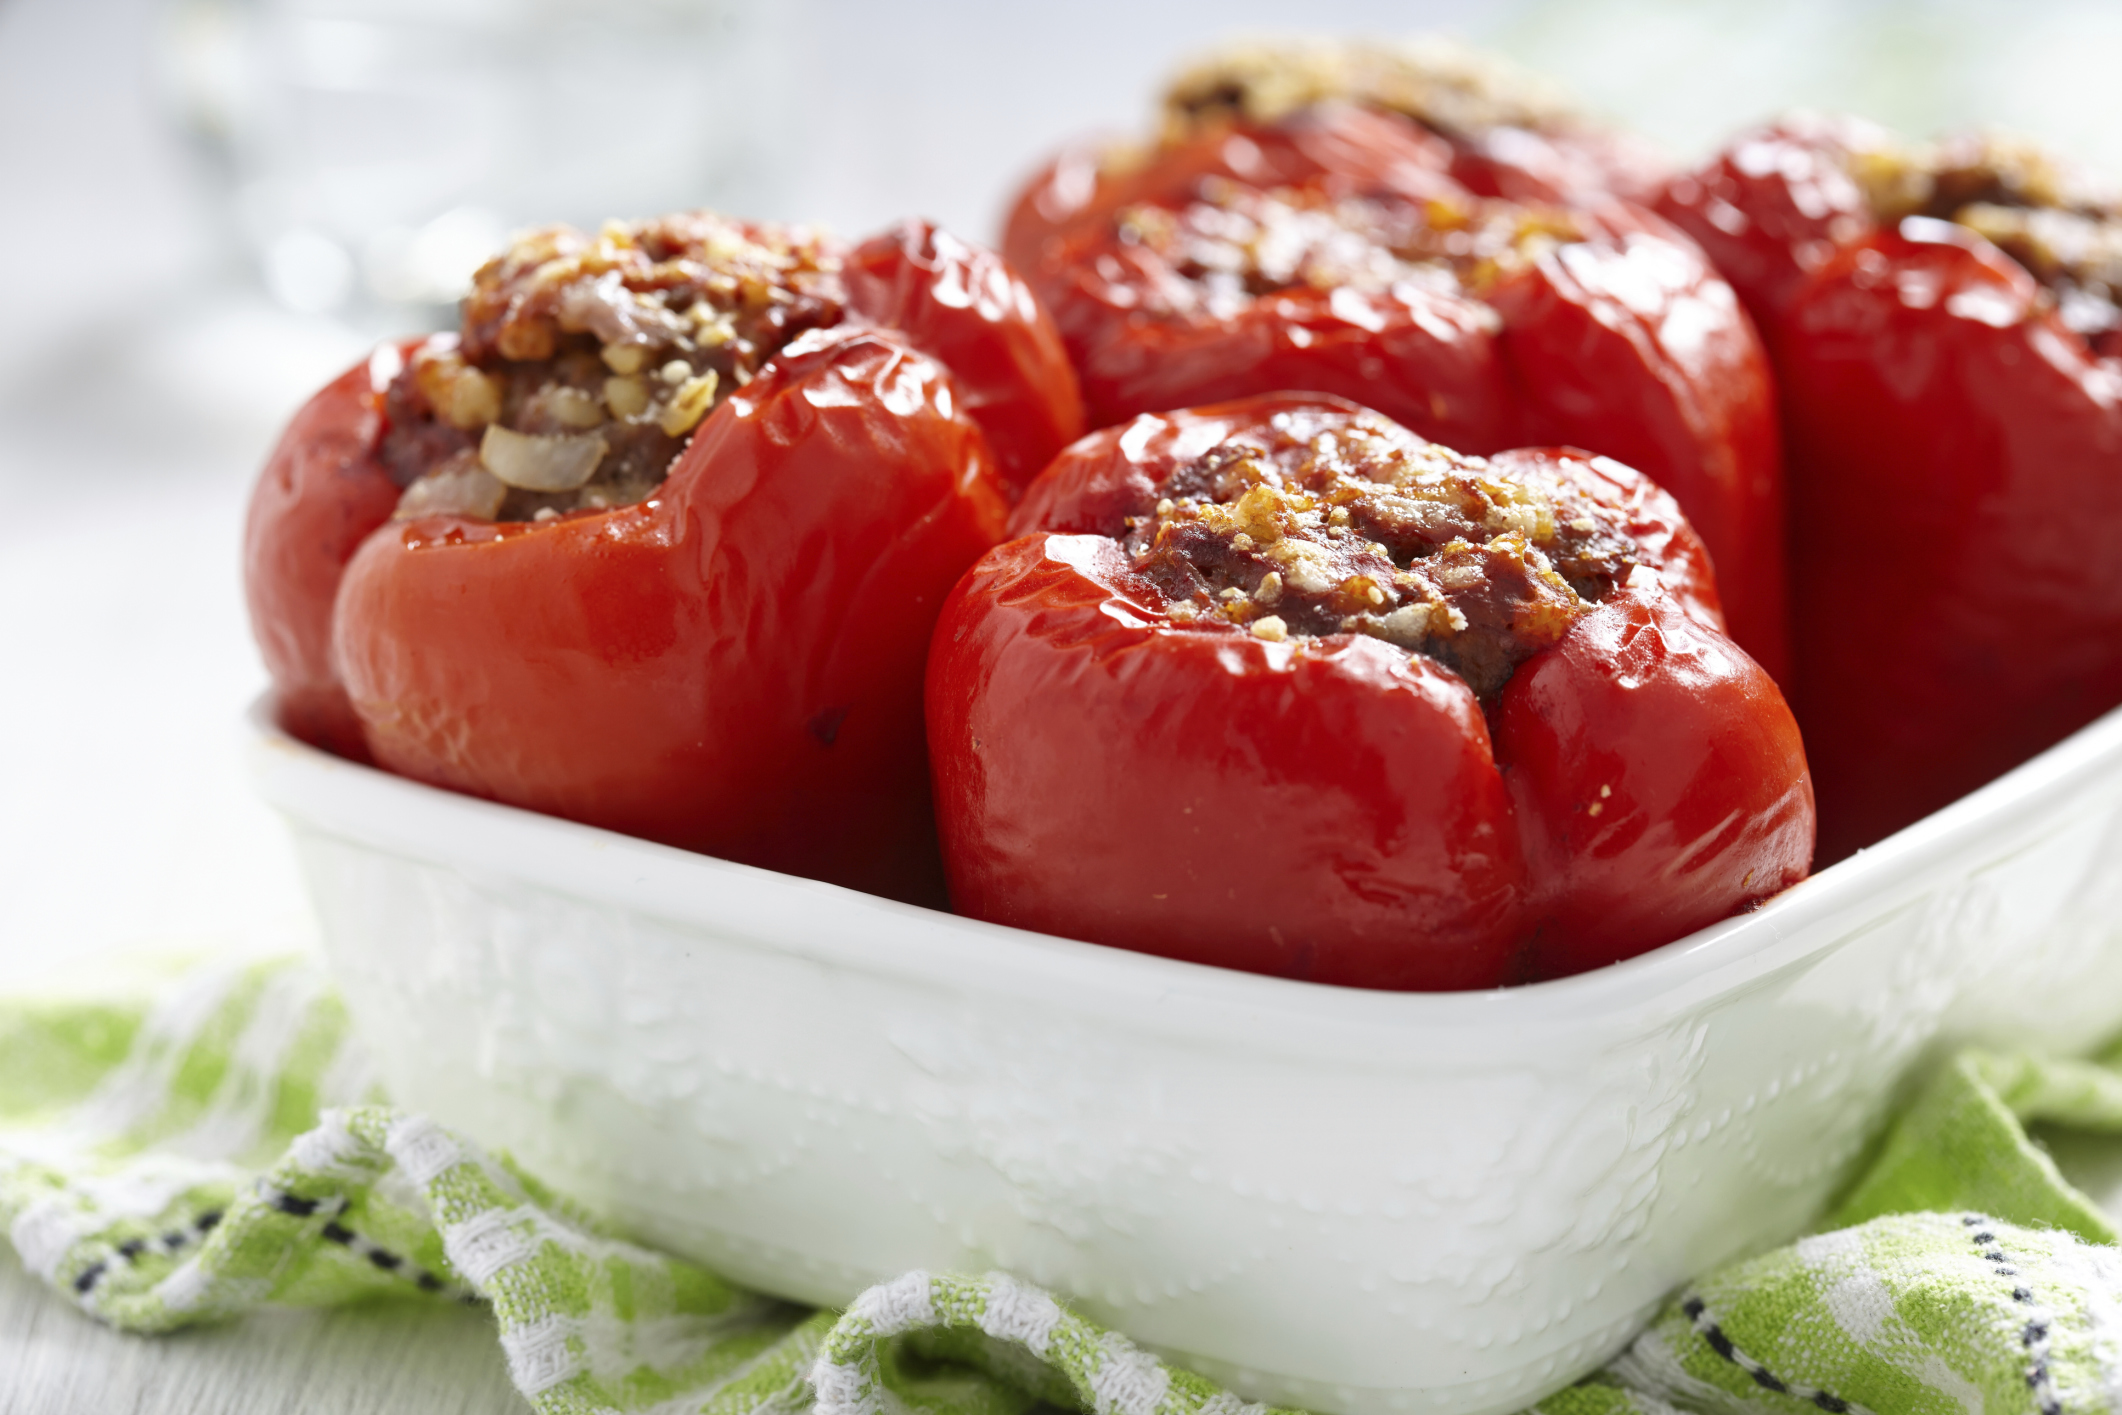 Bell Pepper Nutrition: Benefits, Calories, Warnings and Recipes